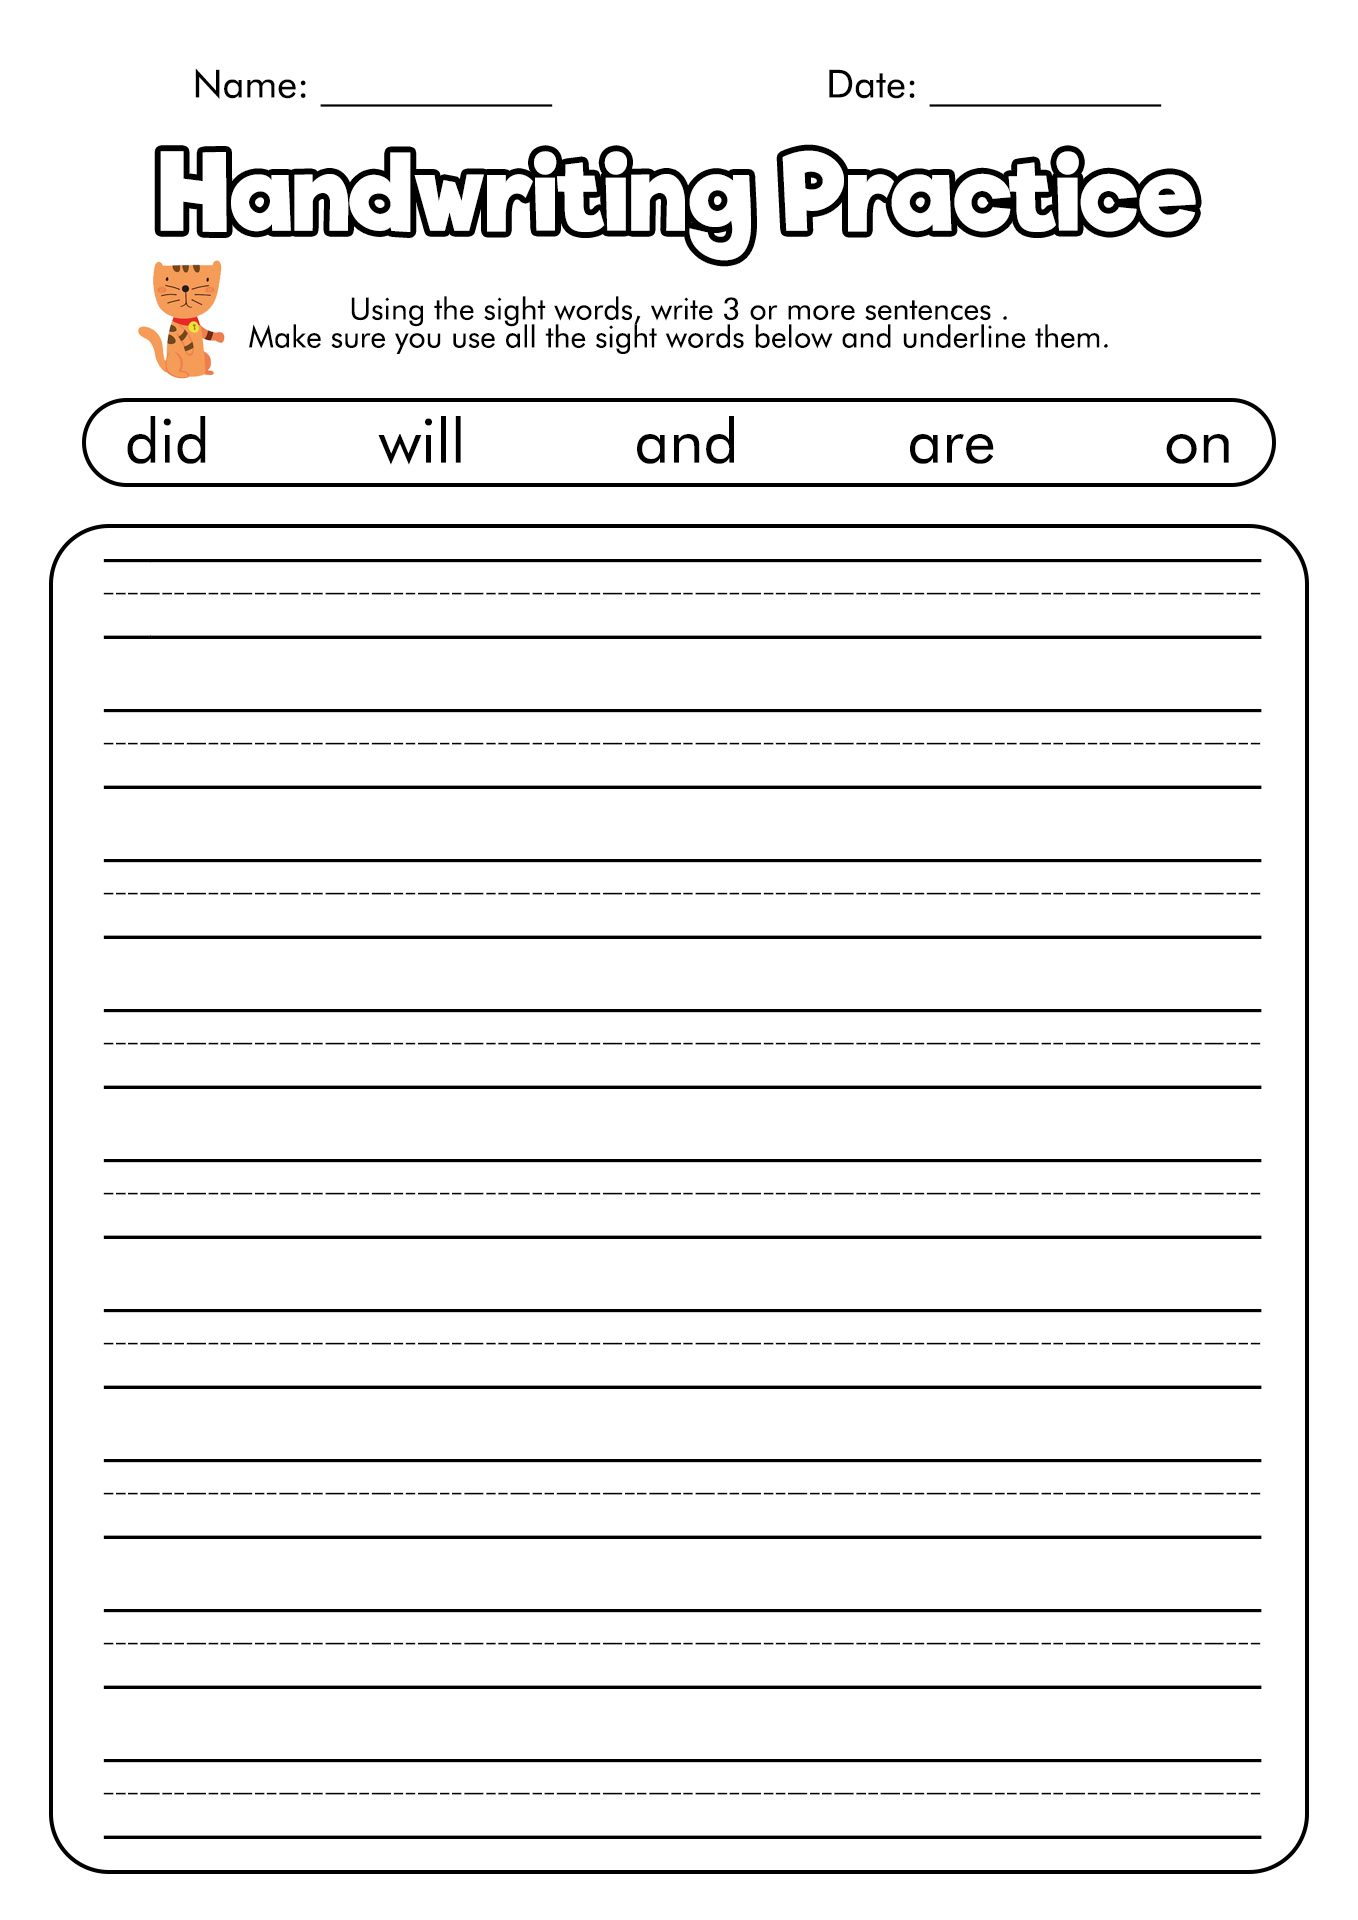 12 Best Images of First Grade Handwriting Practice